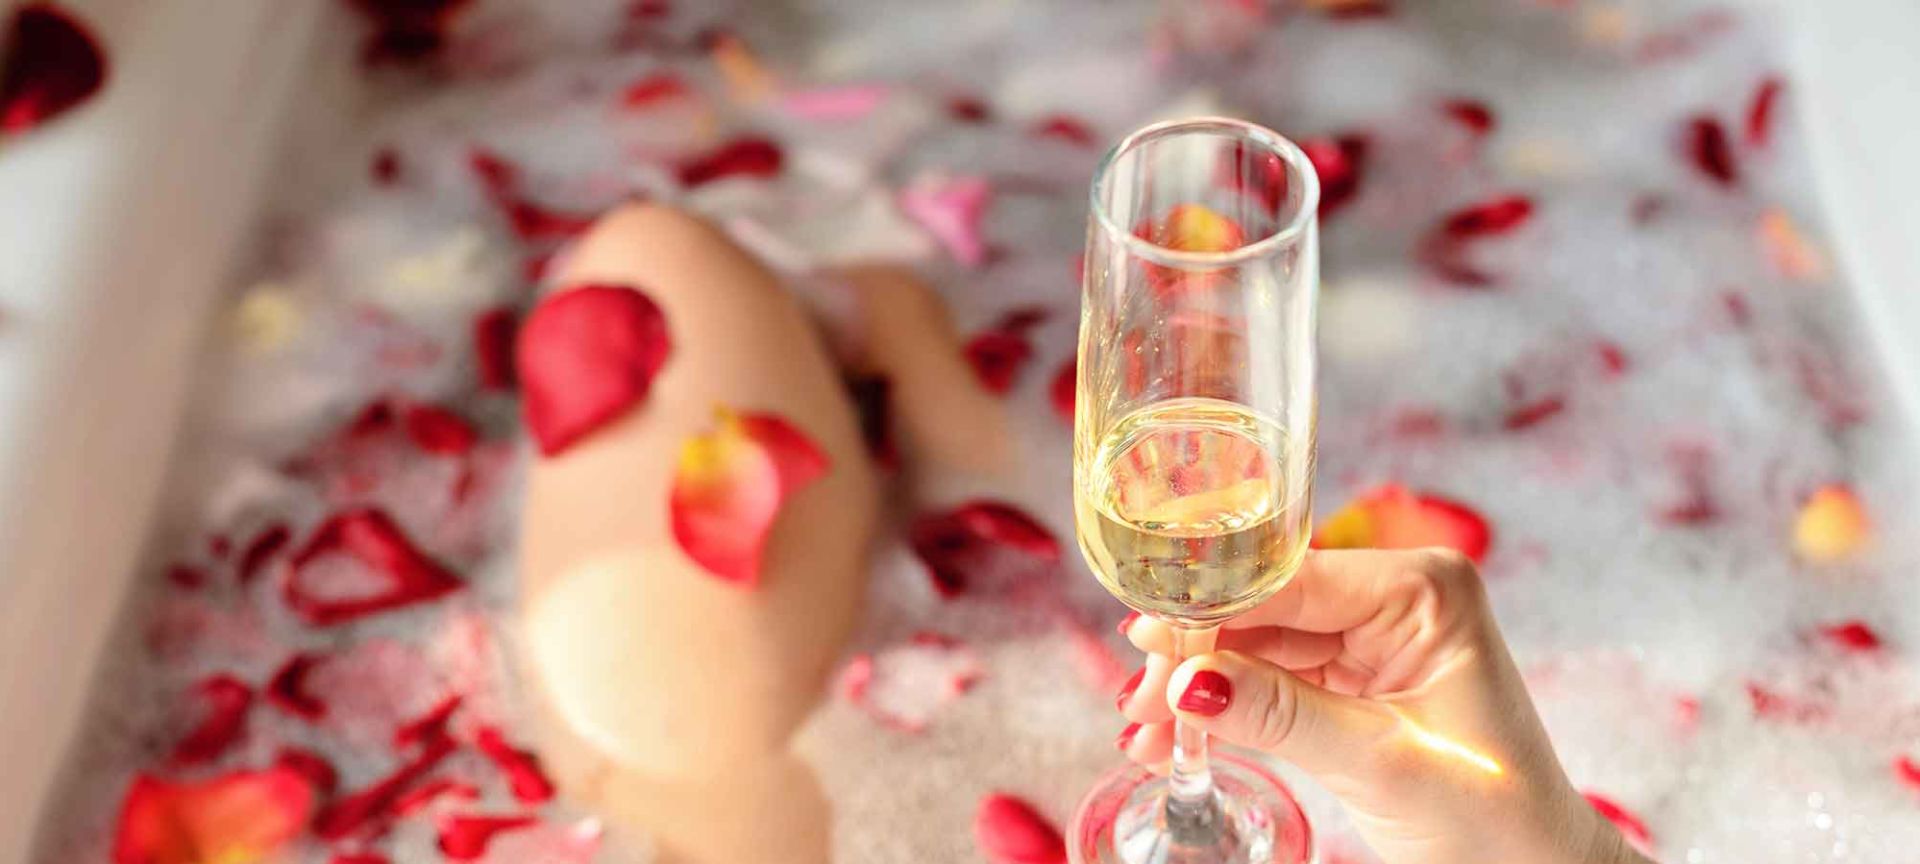 A Bathtub with Rose Petals and Hand Holding a Glass of Champagne